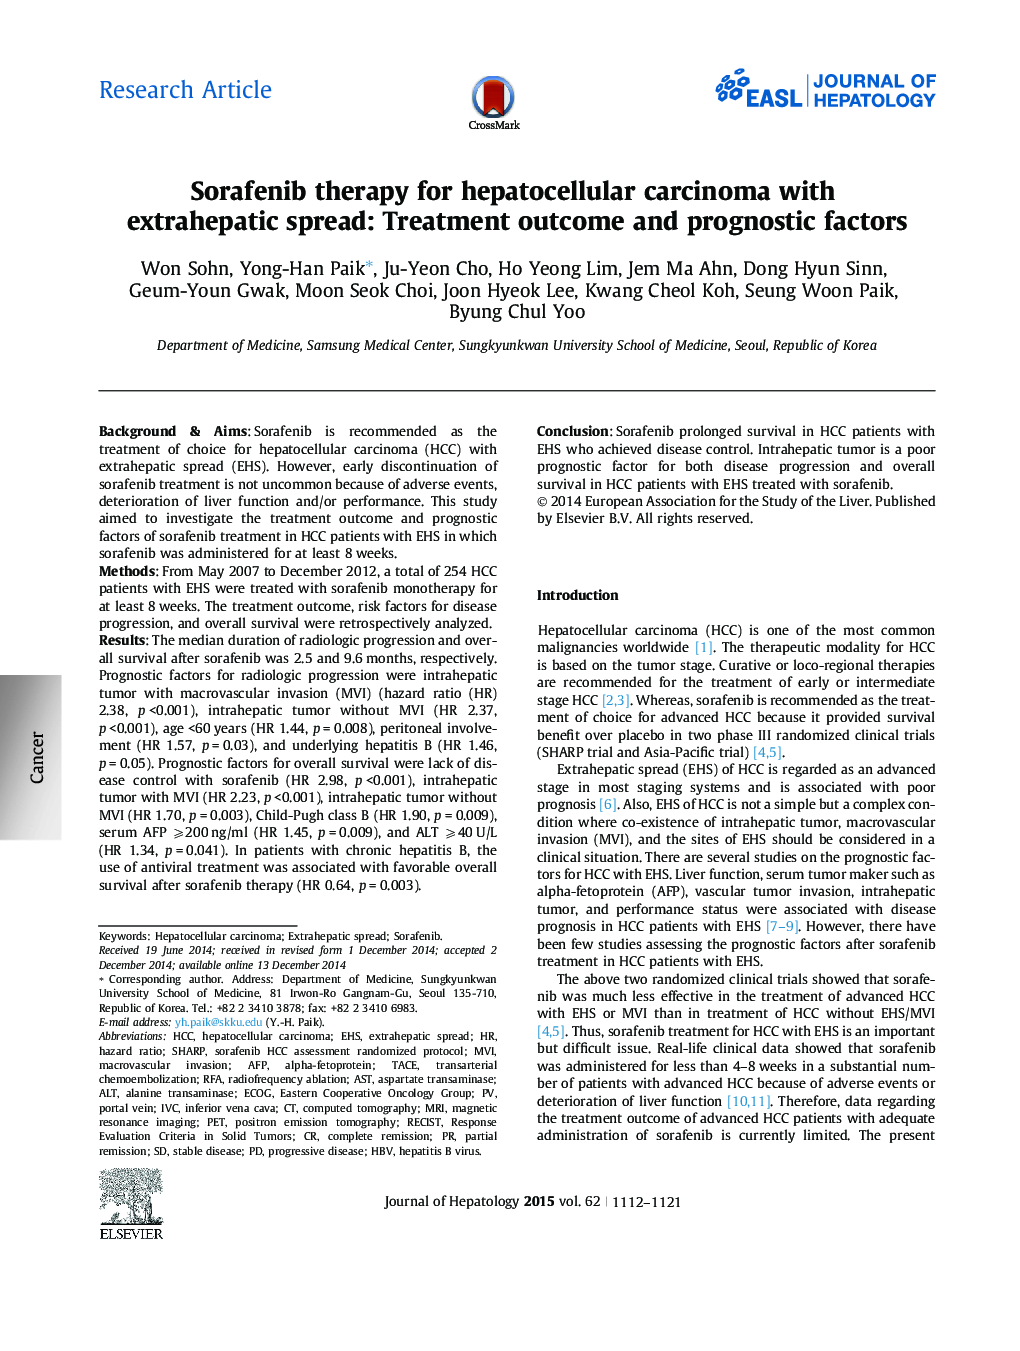 Research ArticleSorafenib therapy for hepatocellular carcinoma with extrahepatic spread: Treatment outcome and prognostic factors